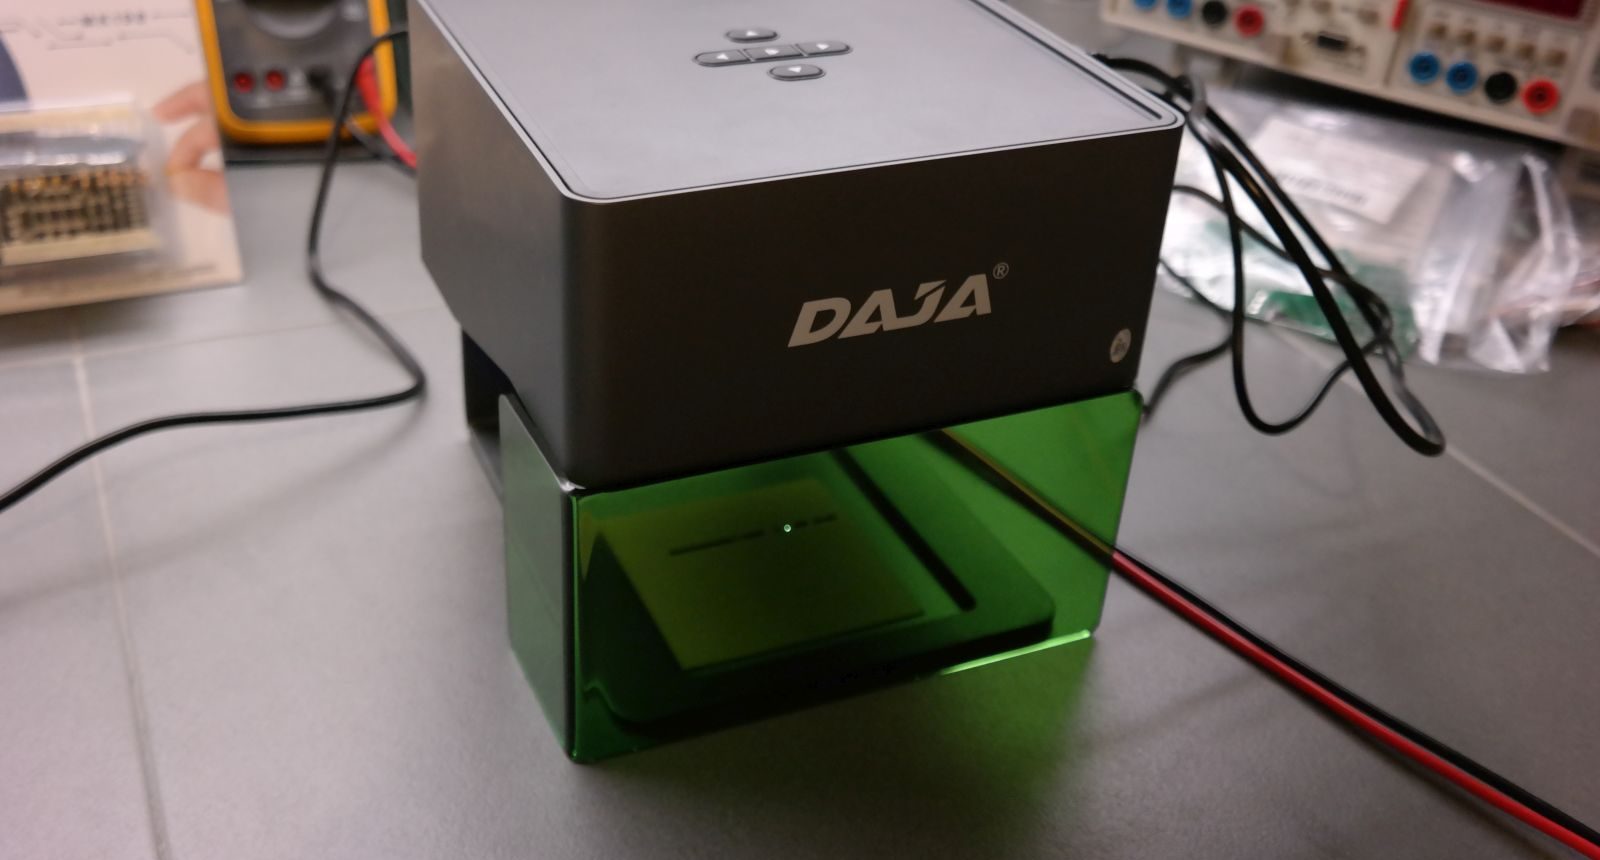 DJ6 Laser Engraver is ready to outperform other devices for it’s low cost